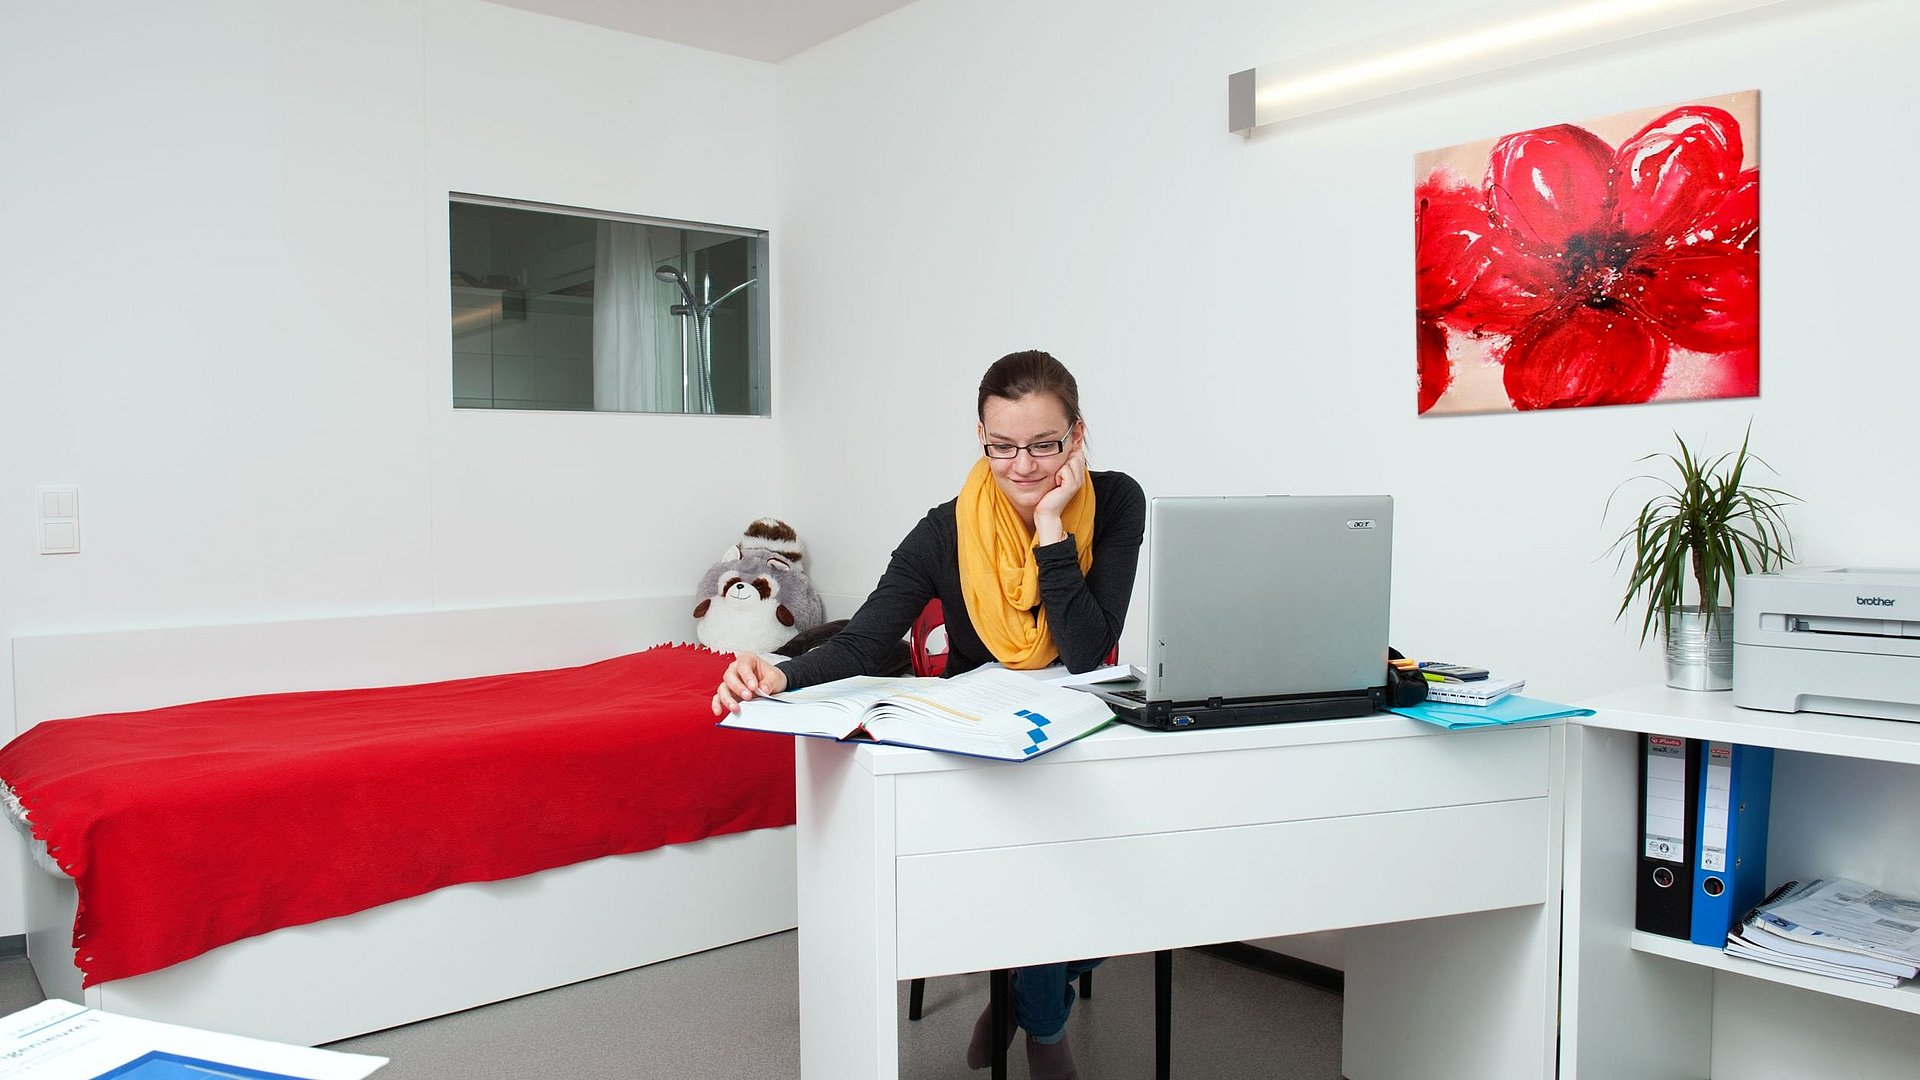 A student n her student room in the "Apian-Studenten-Apartment-Haus" (Student residence) in Unterföhring.